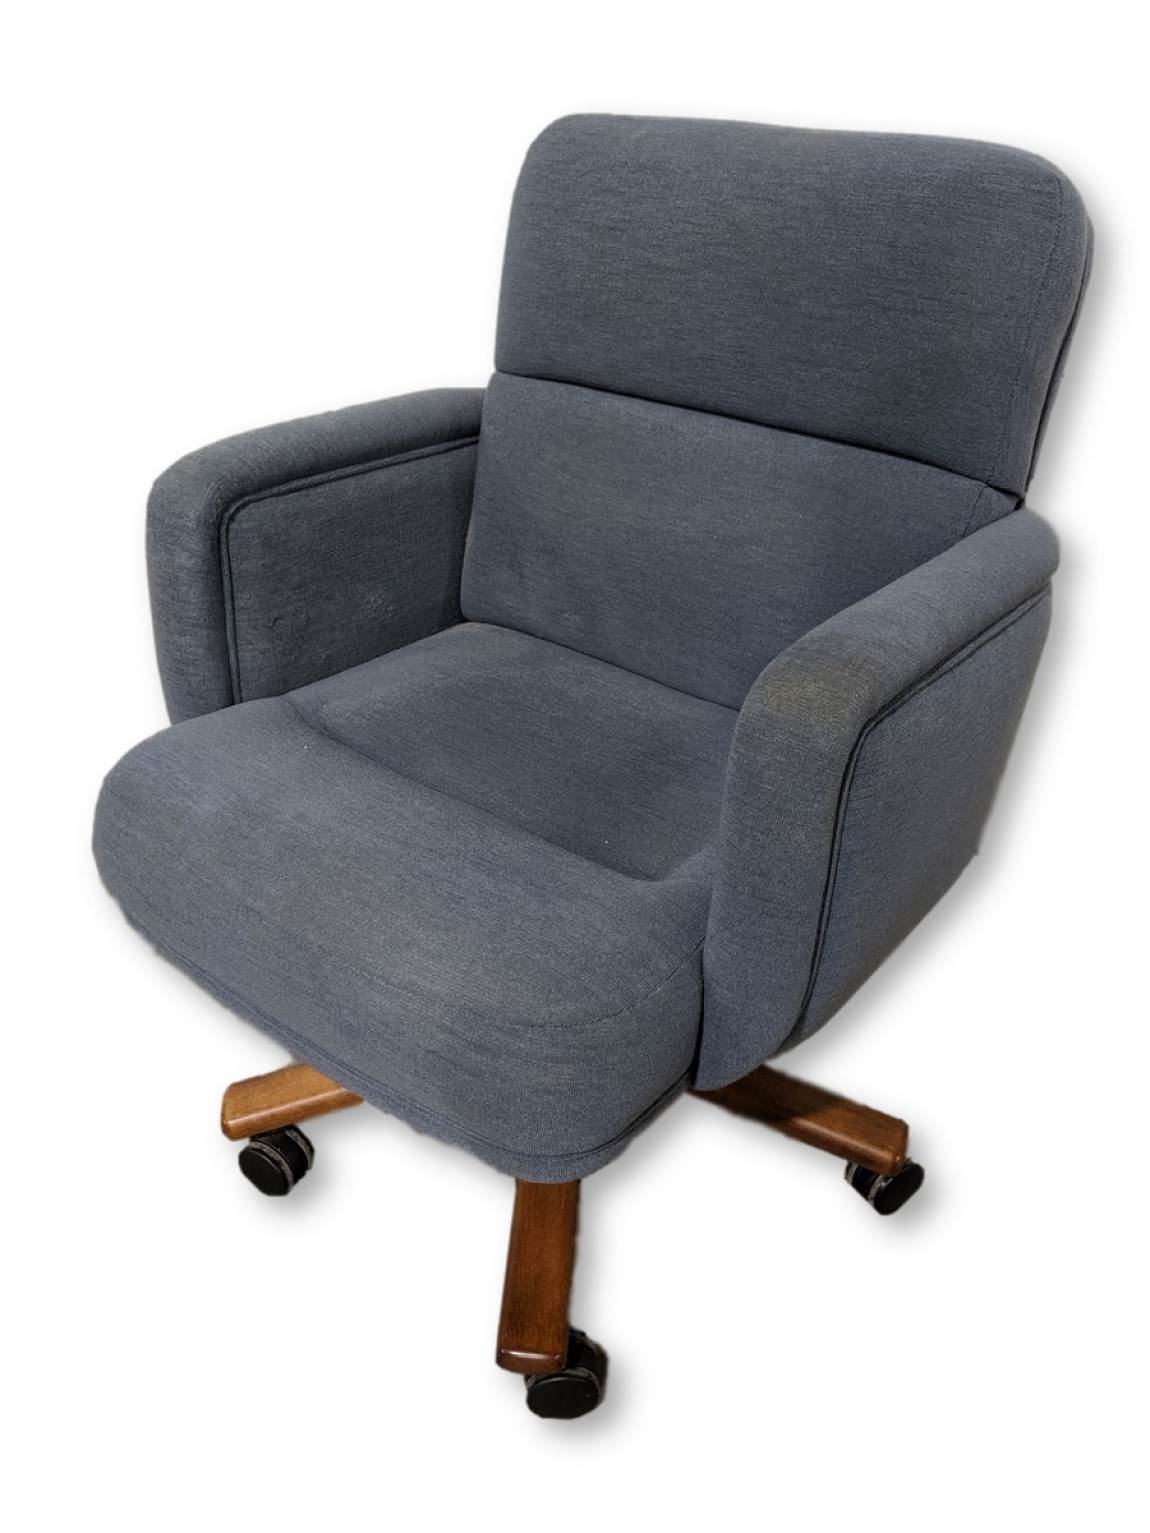 Blue Fabric Swivel Chair with Wood Frame